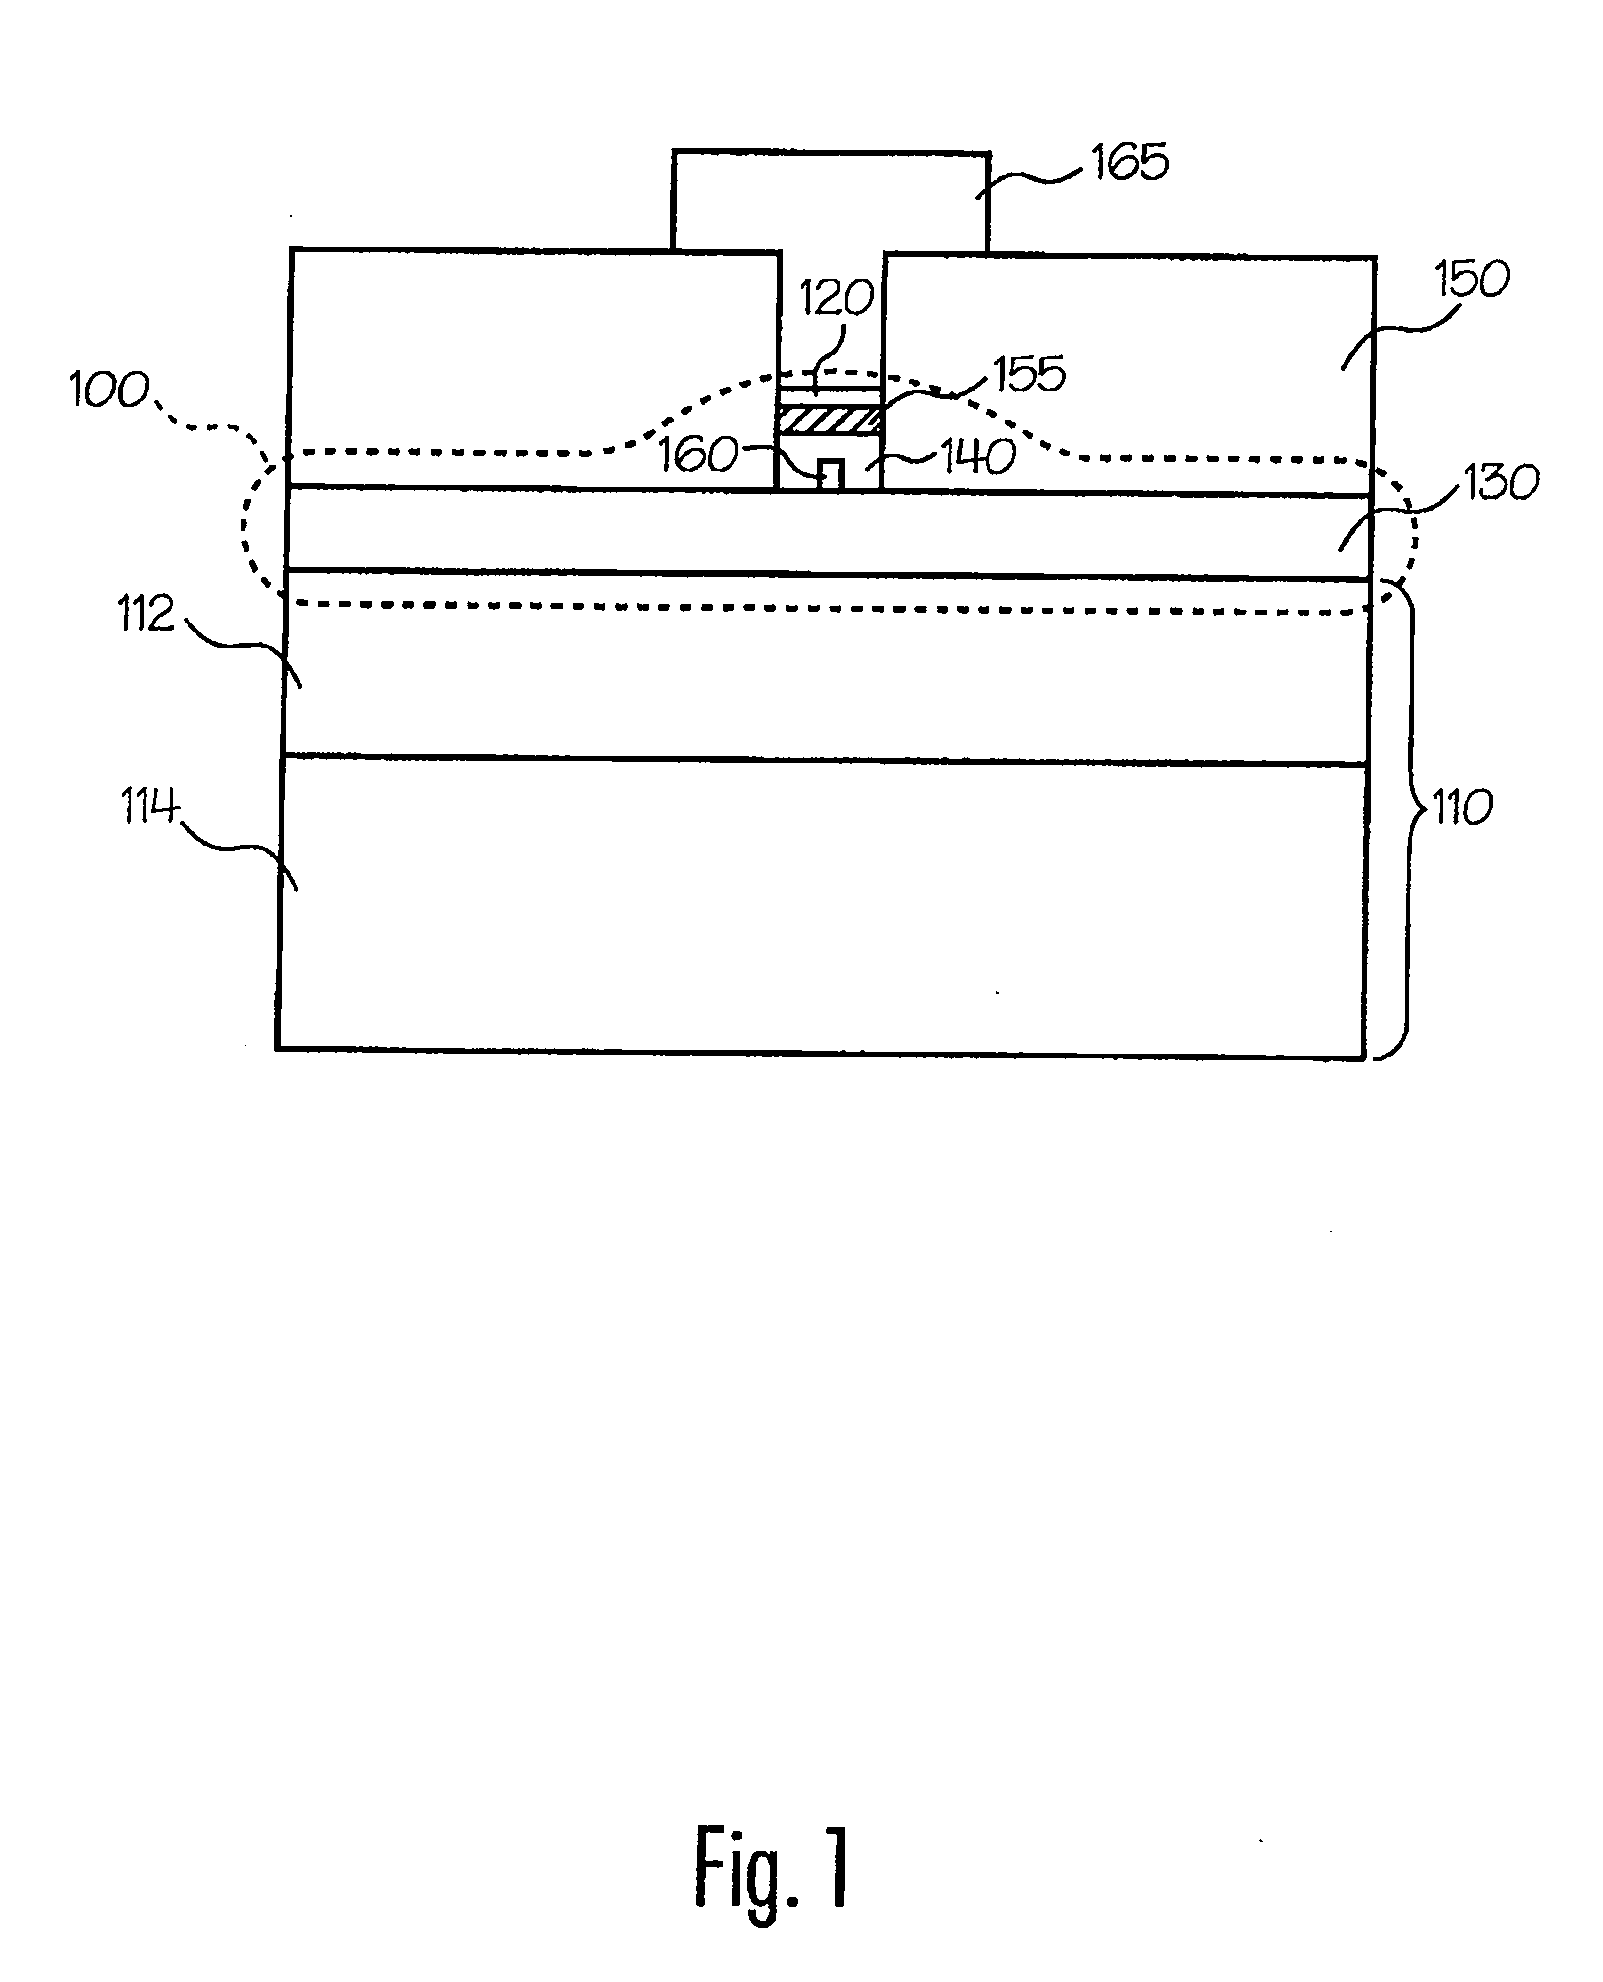 Programmable metallization cell structure including an integrated diode, device including the structure, and method of forming same